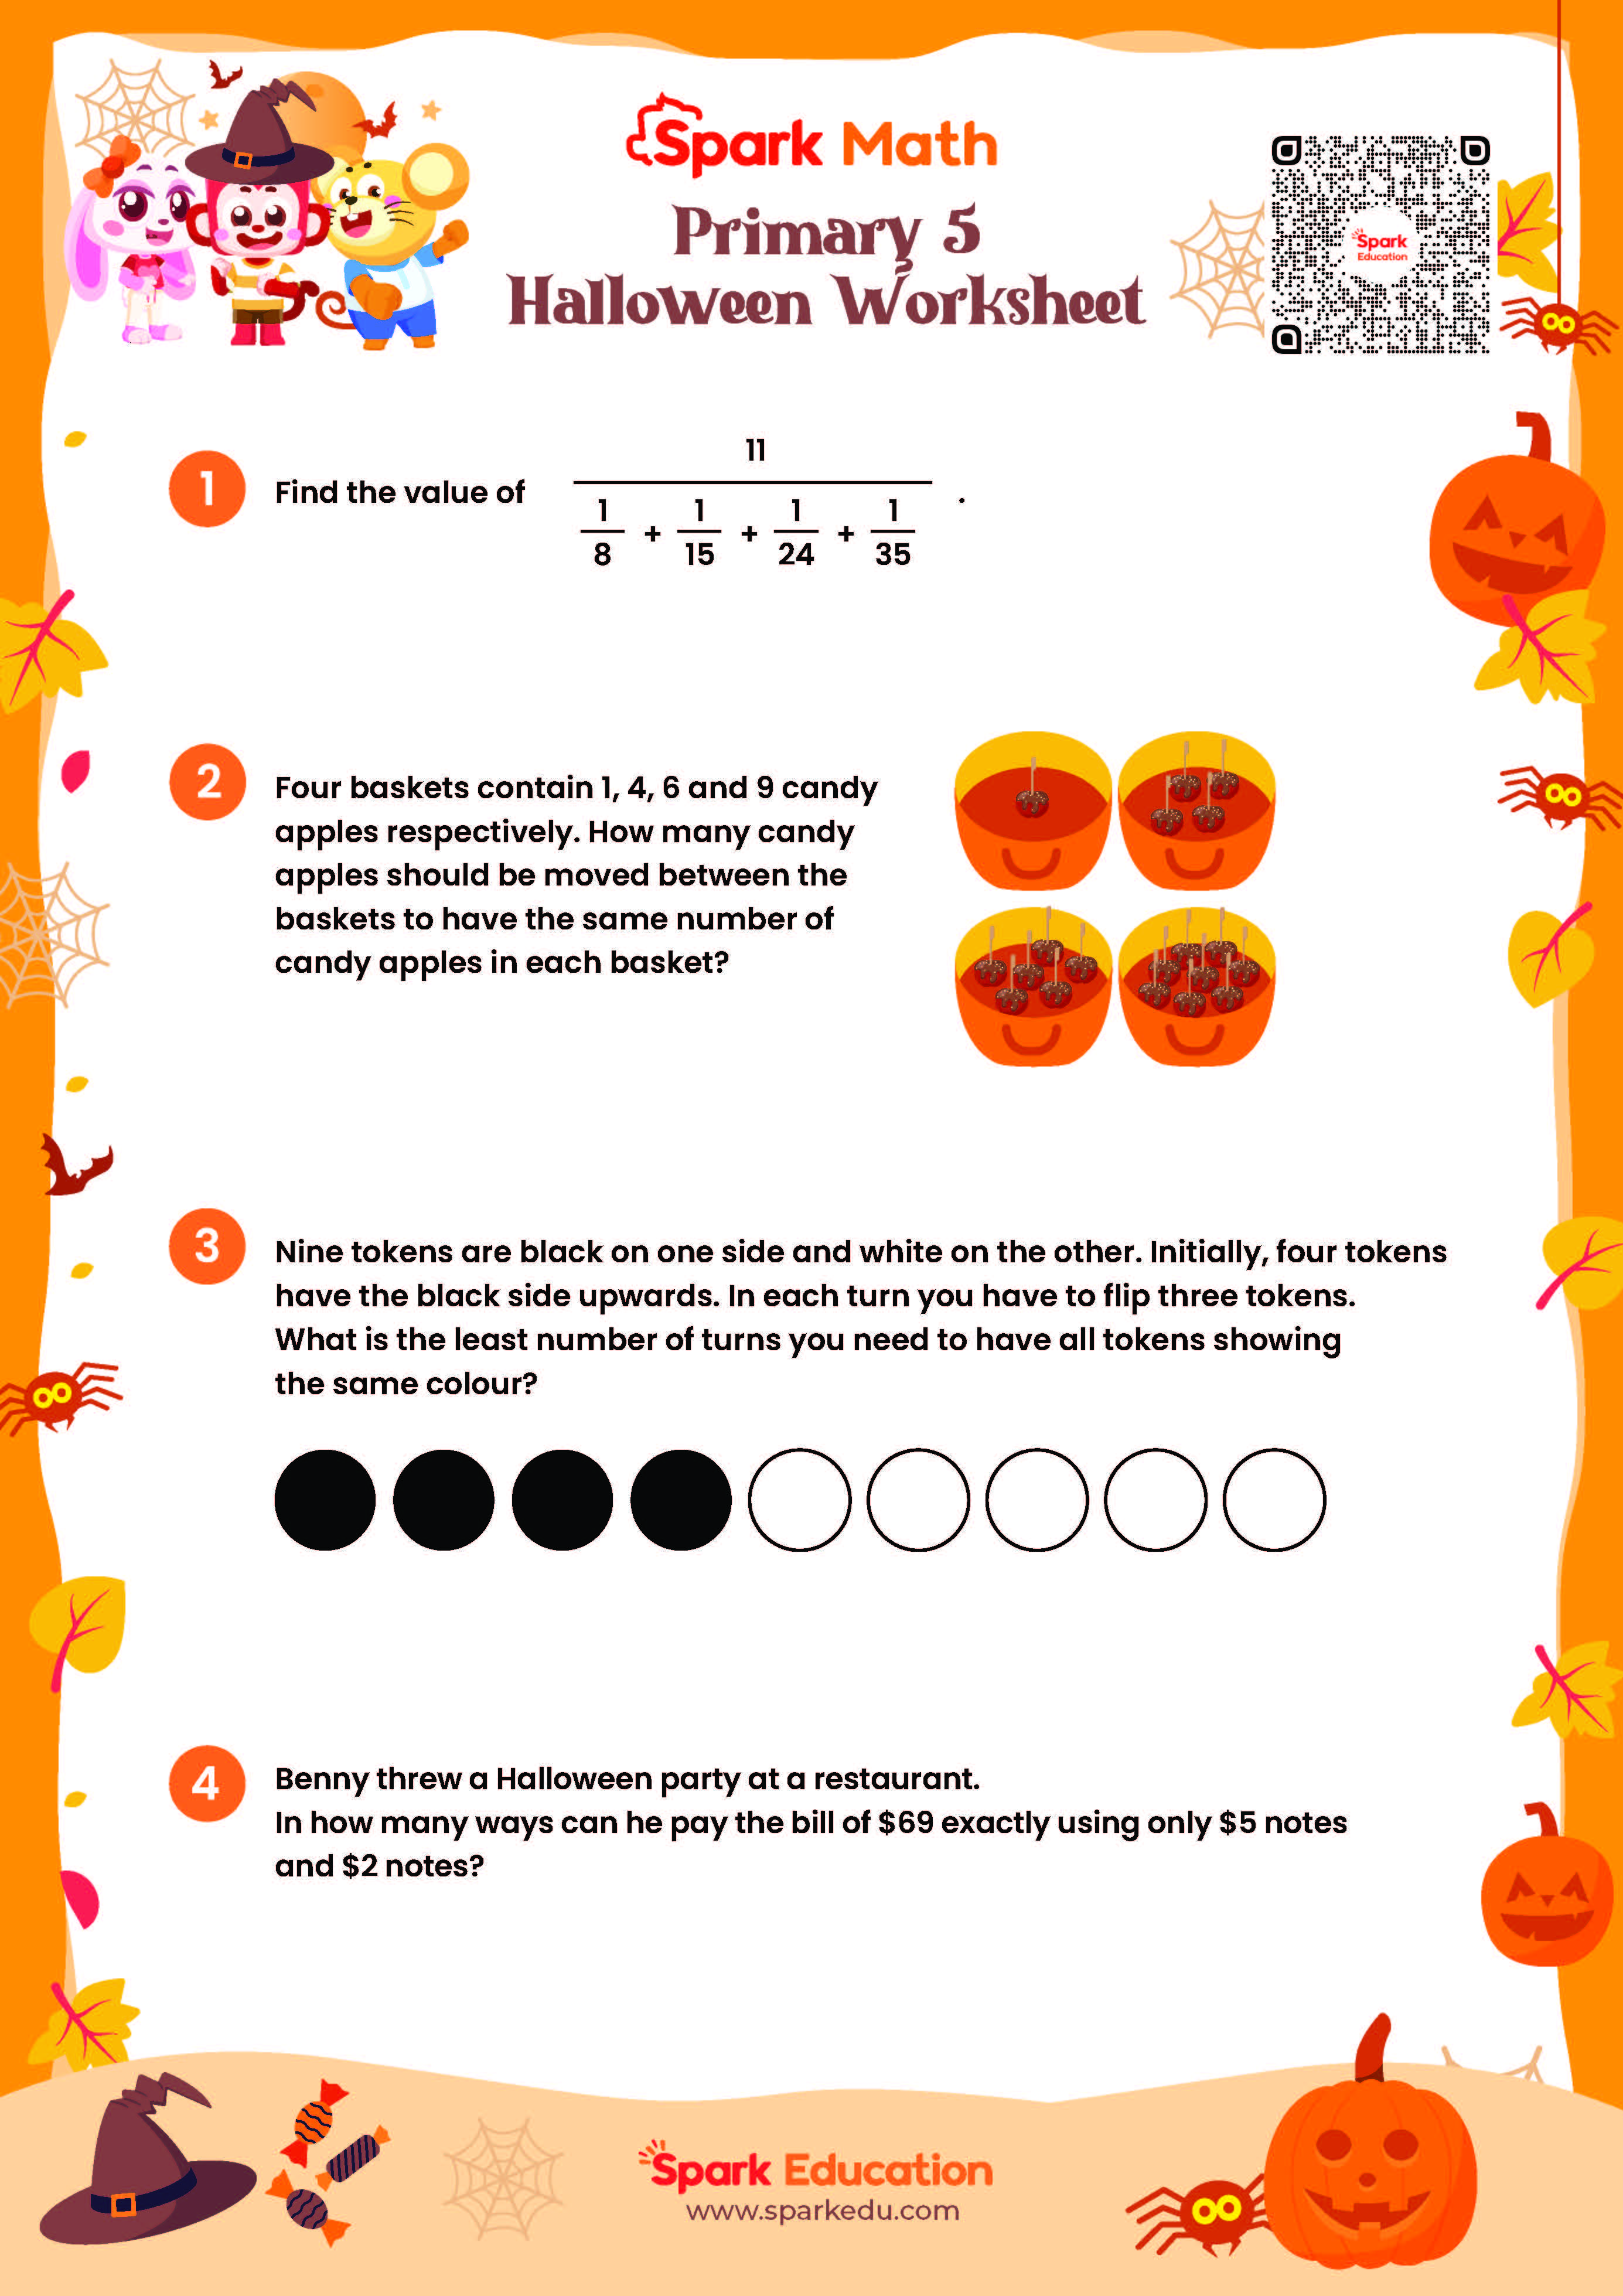 Spark Math Halloween P5 Worksheet Page 1 preview